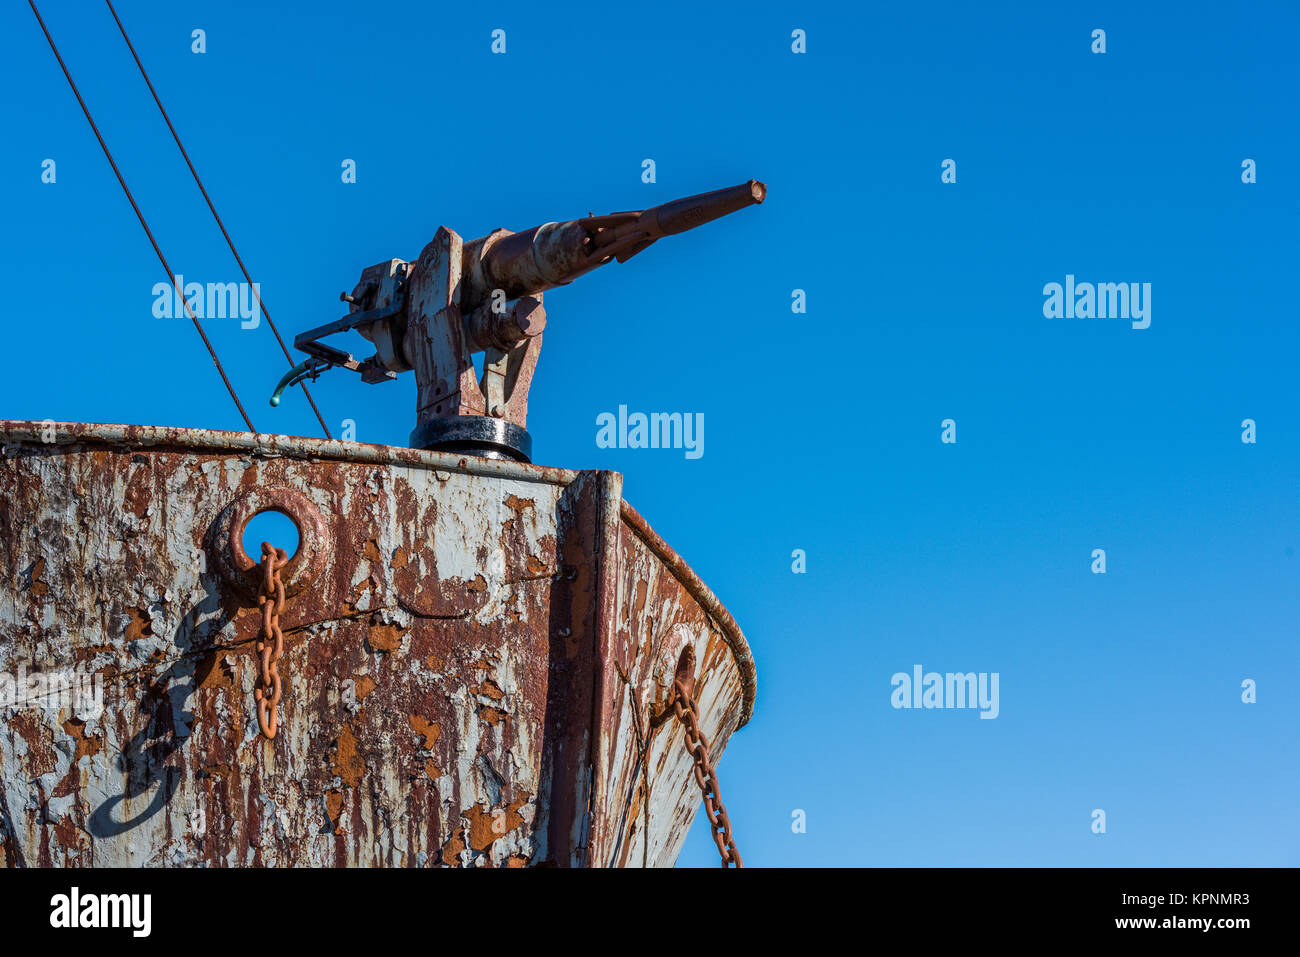 Close-up of harpoon gun on whaler bows Stock Photo